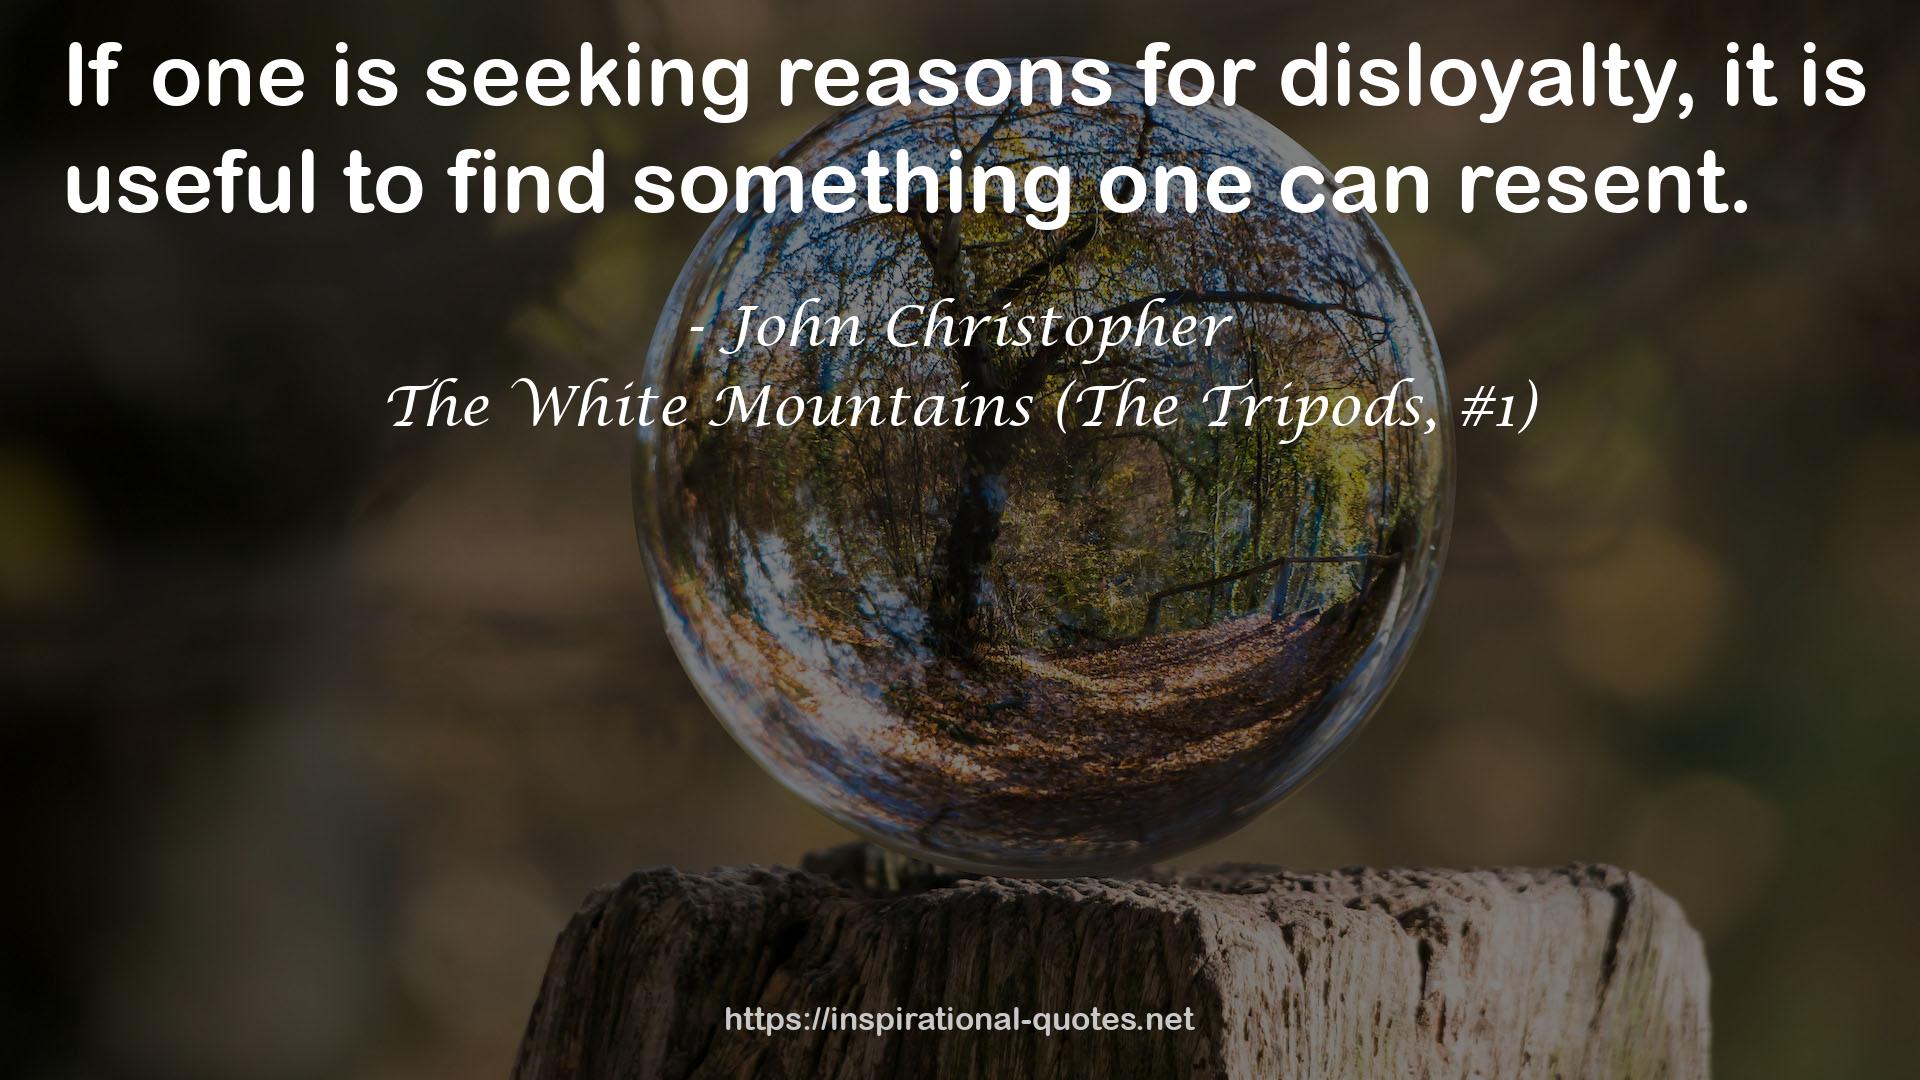 The White Mountains (The Tripods, #1) QUOTES